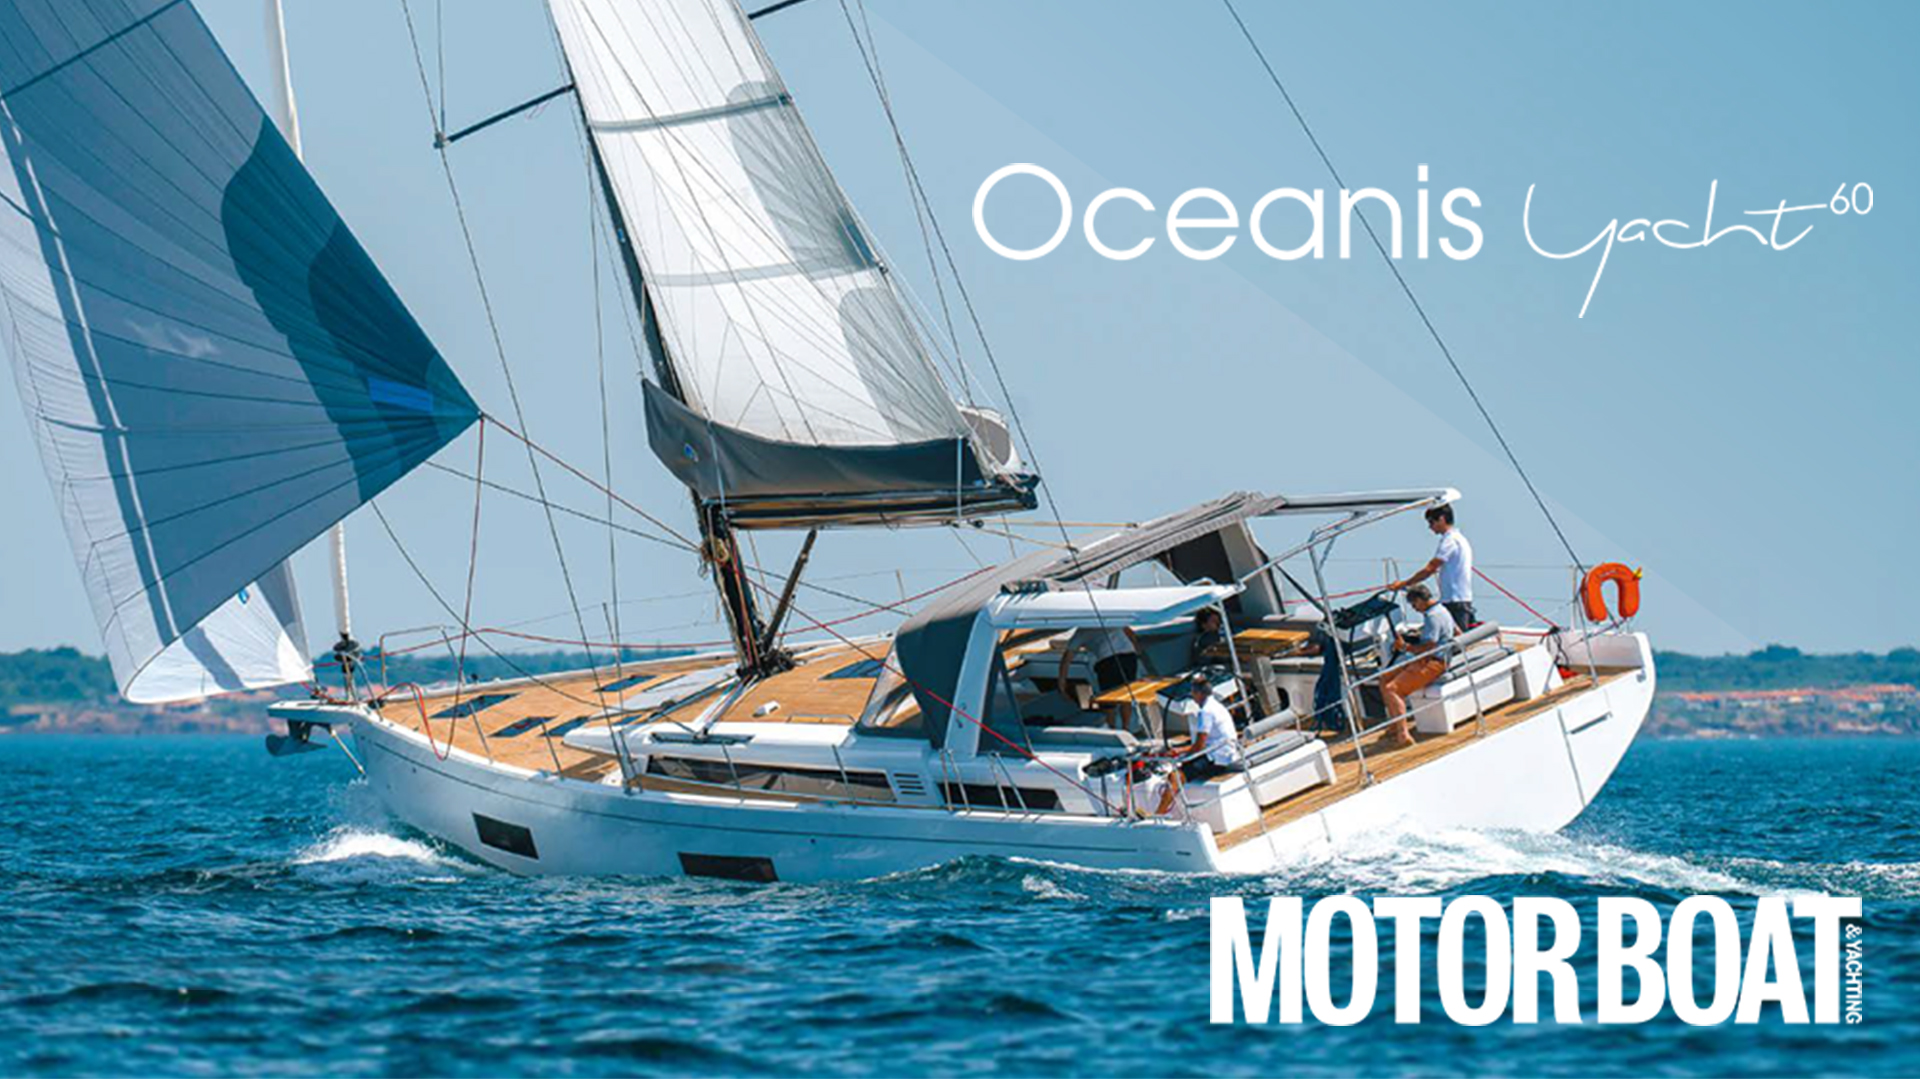 Motorboat & Yachting 2023 - Oceanis Yacht 60